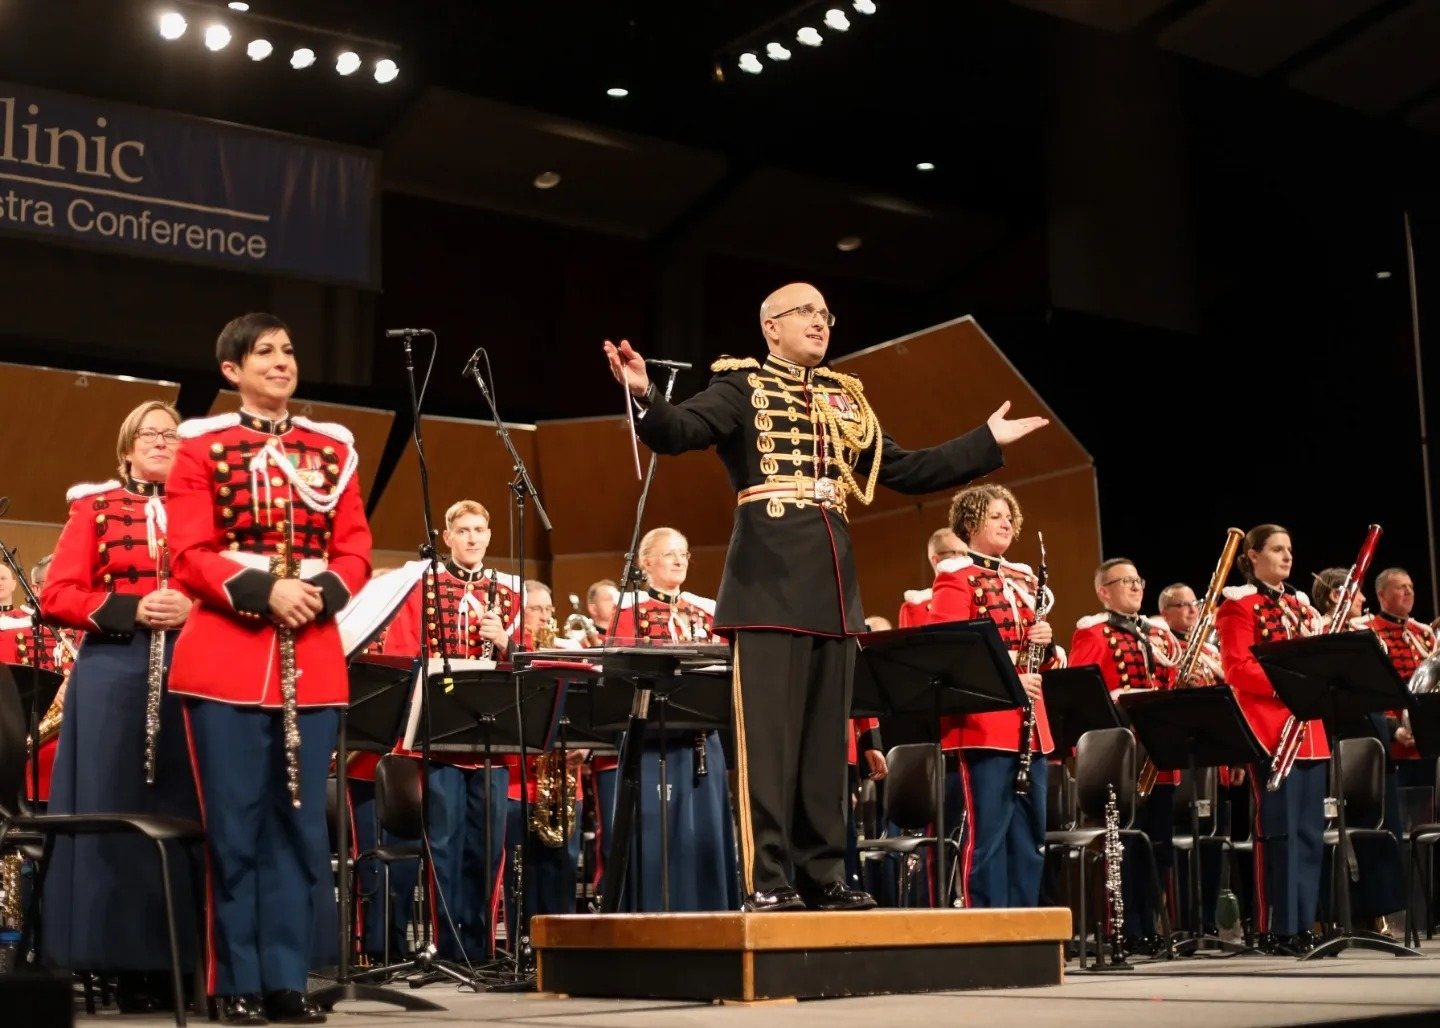 U.S. Marine Band Director Lt. Col. Ryan Nowlin raises his arms at the end of a performance